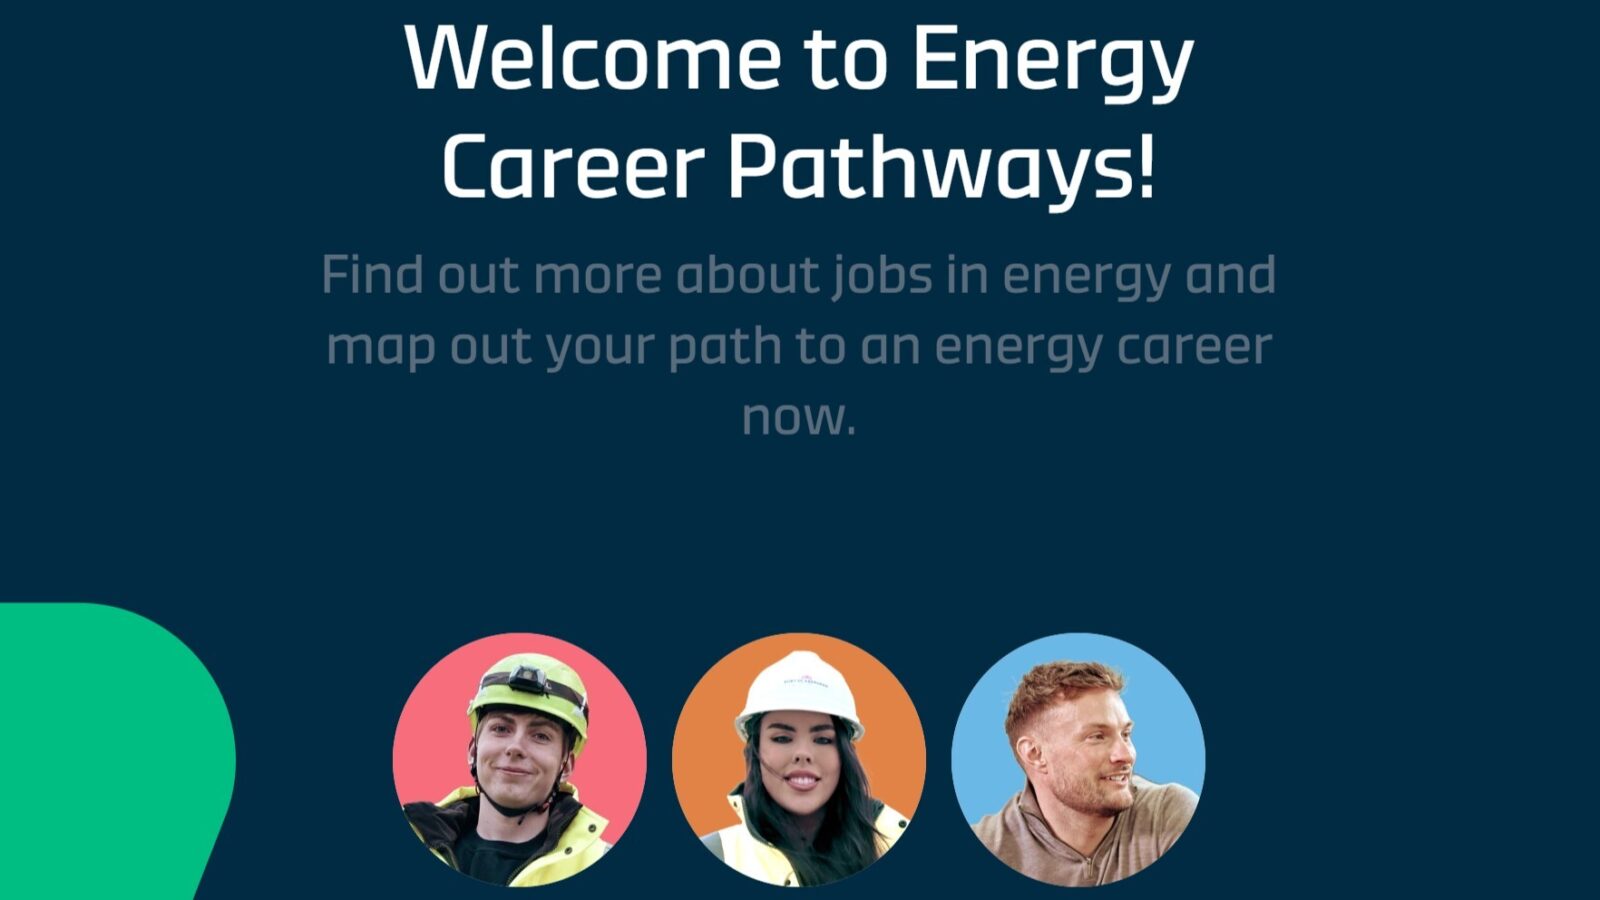 NESA is delighted to announce the launch of the pilot Energy Career Pathways tool